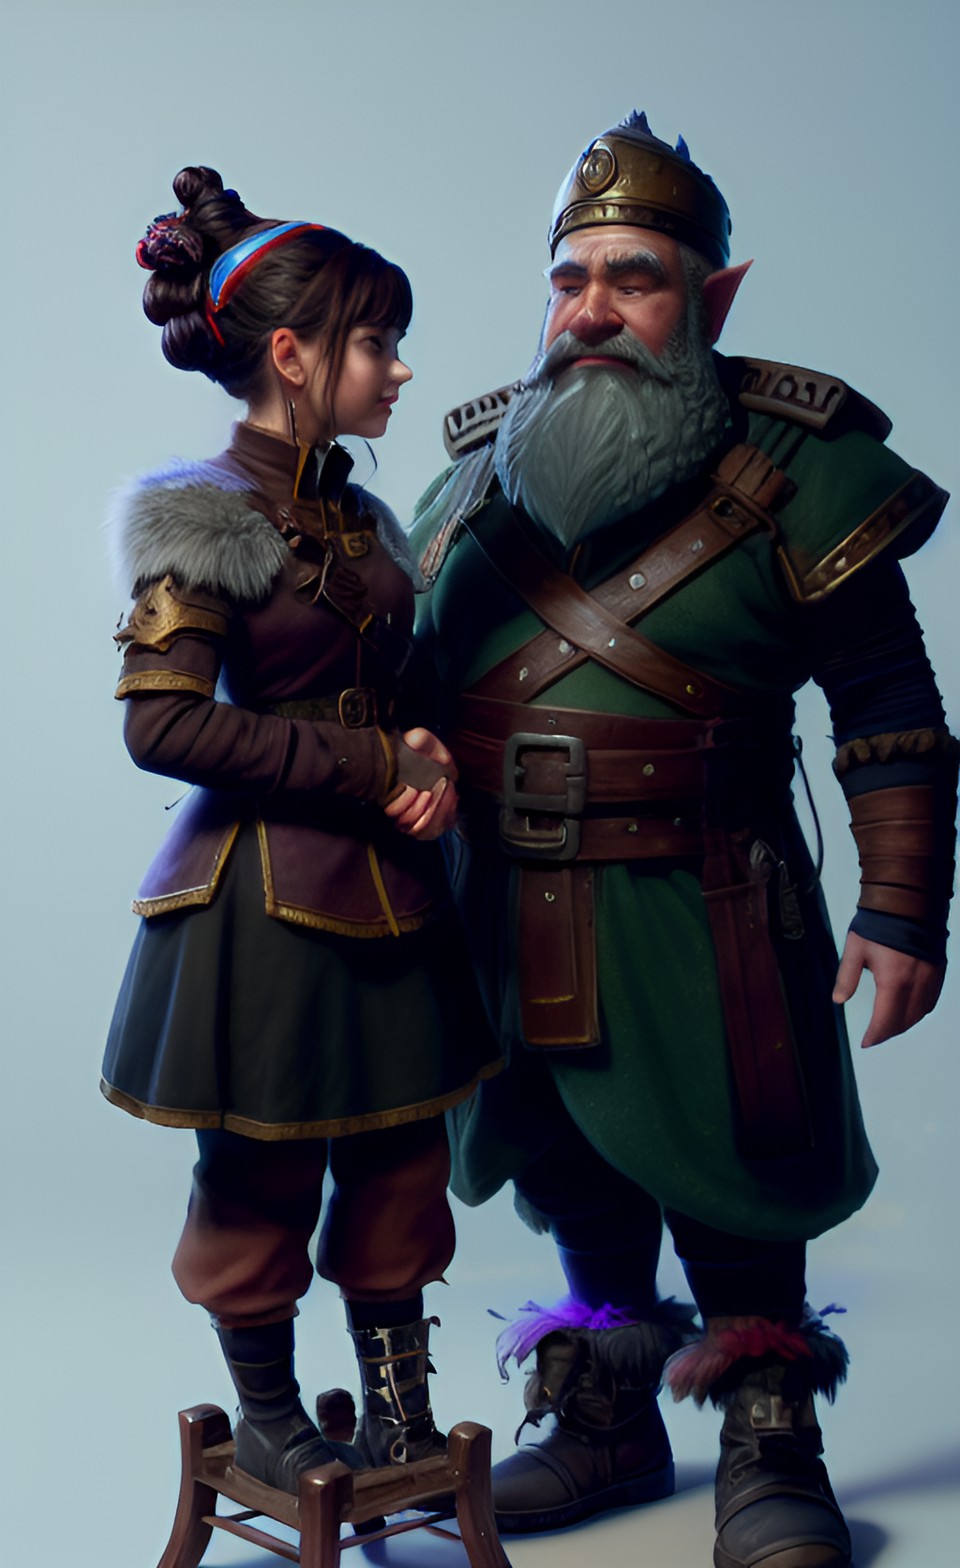 gnome and dwarf shaking hands